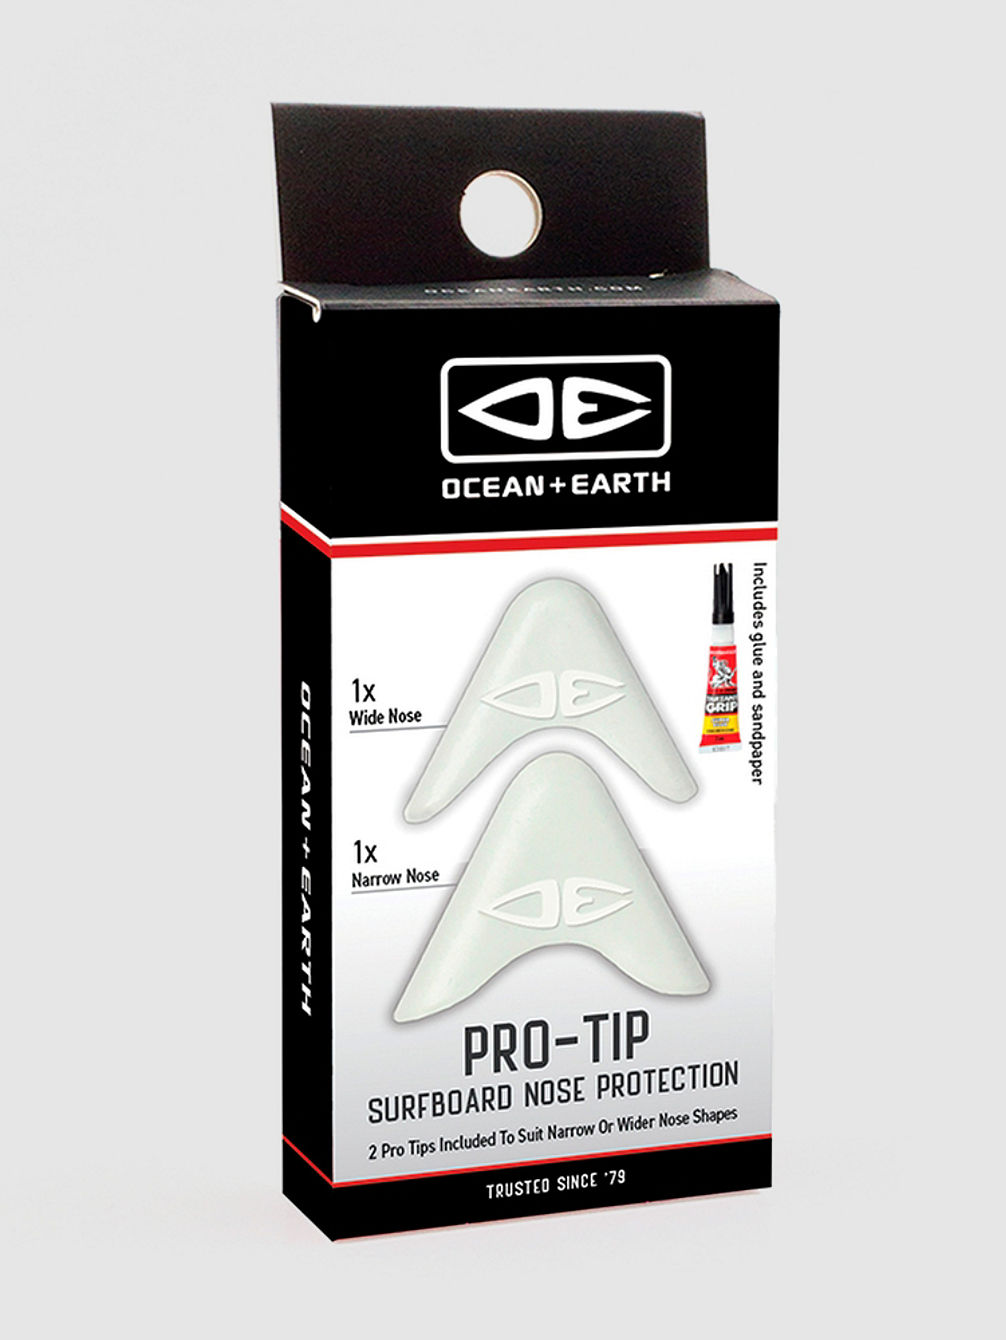 Pro-Tip Nose Protection Kit